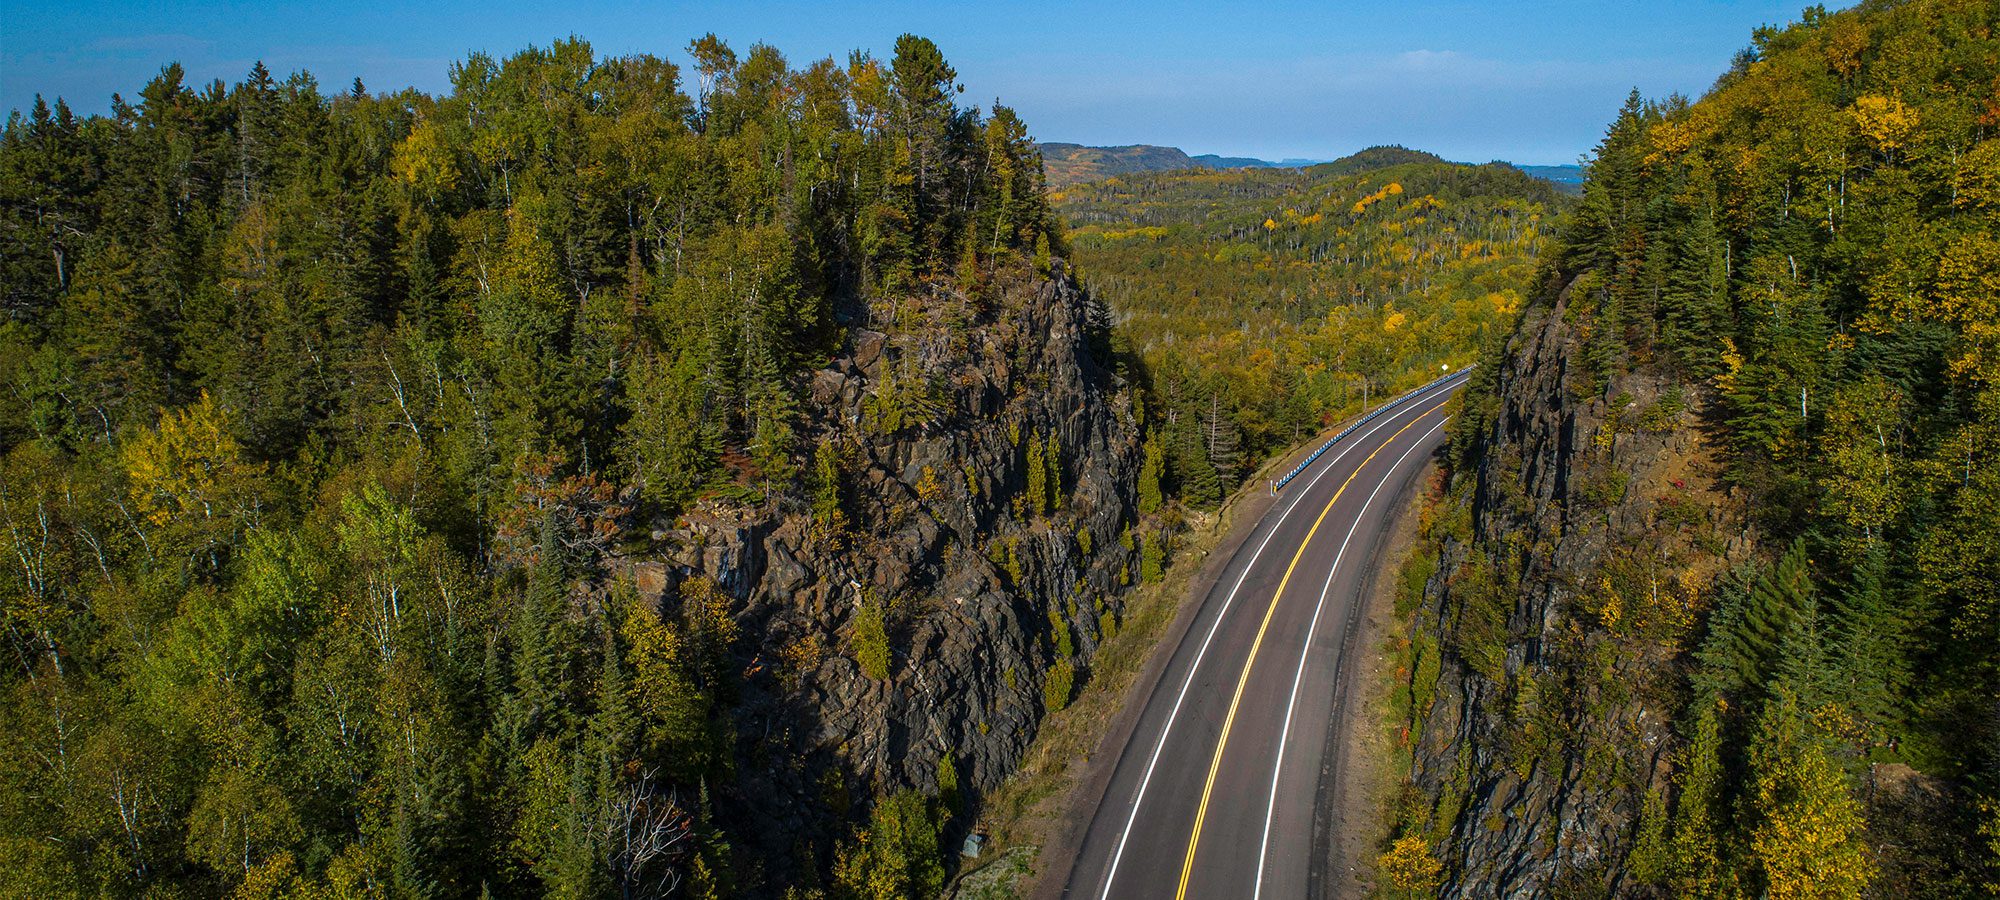 aerial view of highway lined with forest and rocks